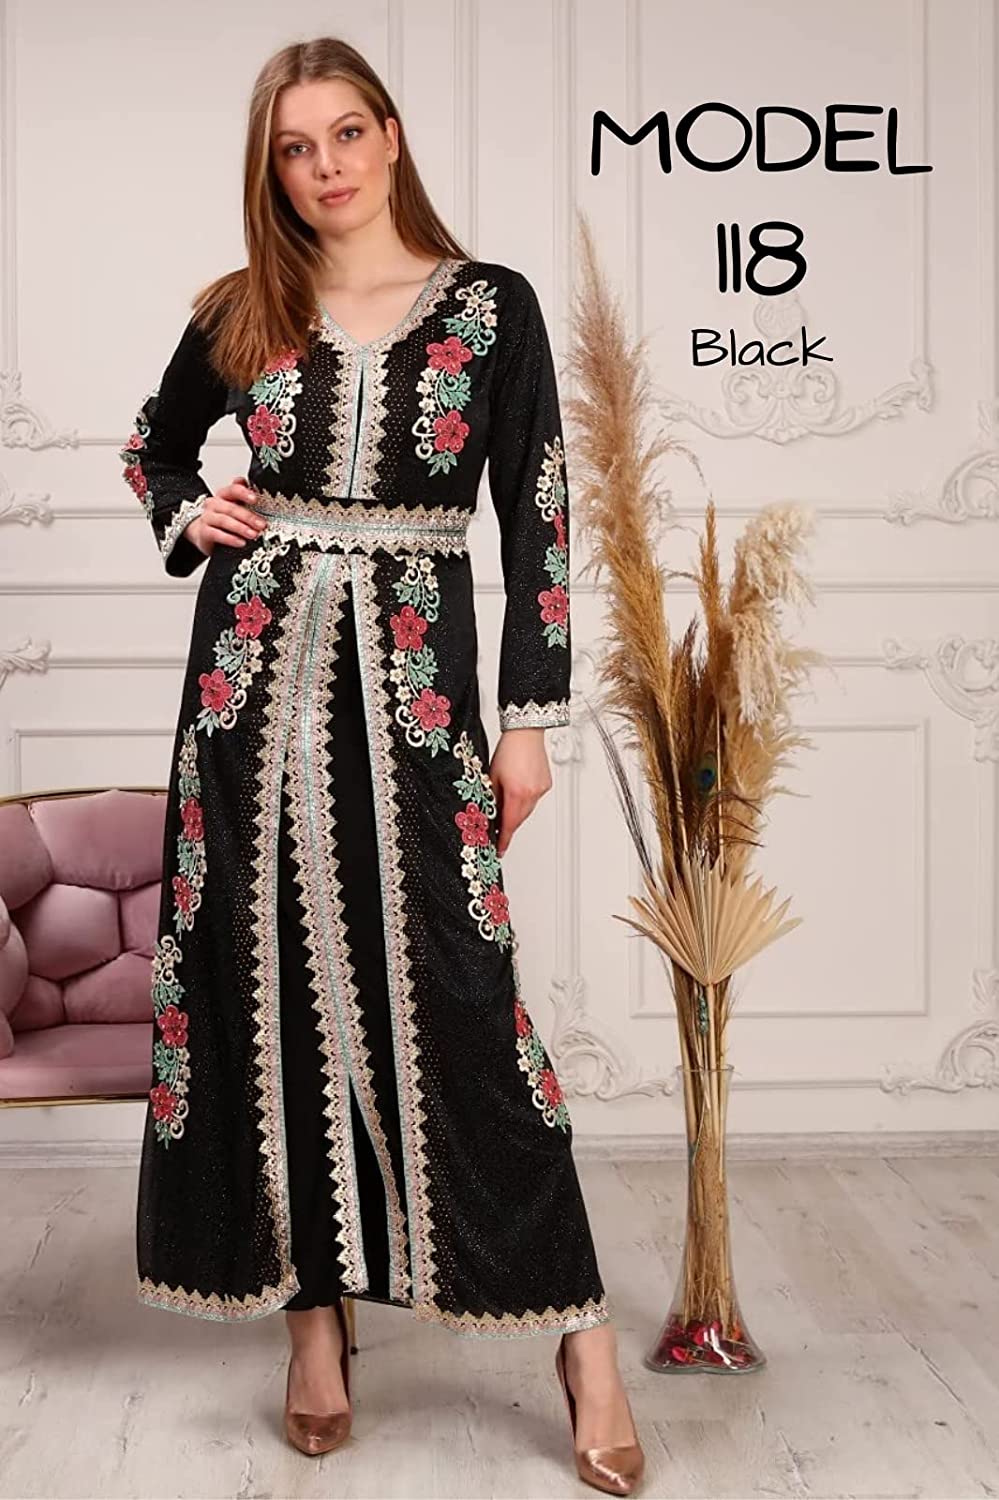 Marwa Fashion Kaftan Women Dresses - Long Arabic Kaftans for Women with Traditional Embroidery - Comfortable and Stylish Kaftan Made from Luxurious Chiffon Crepe Fabric